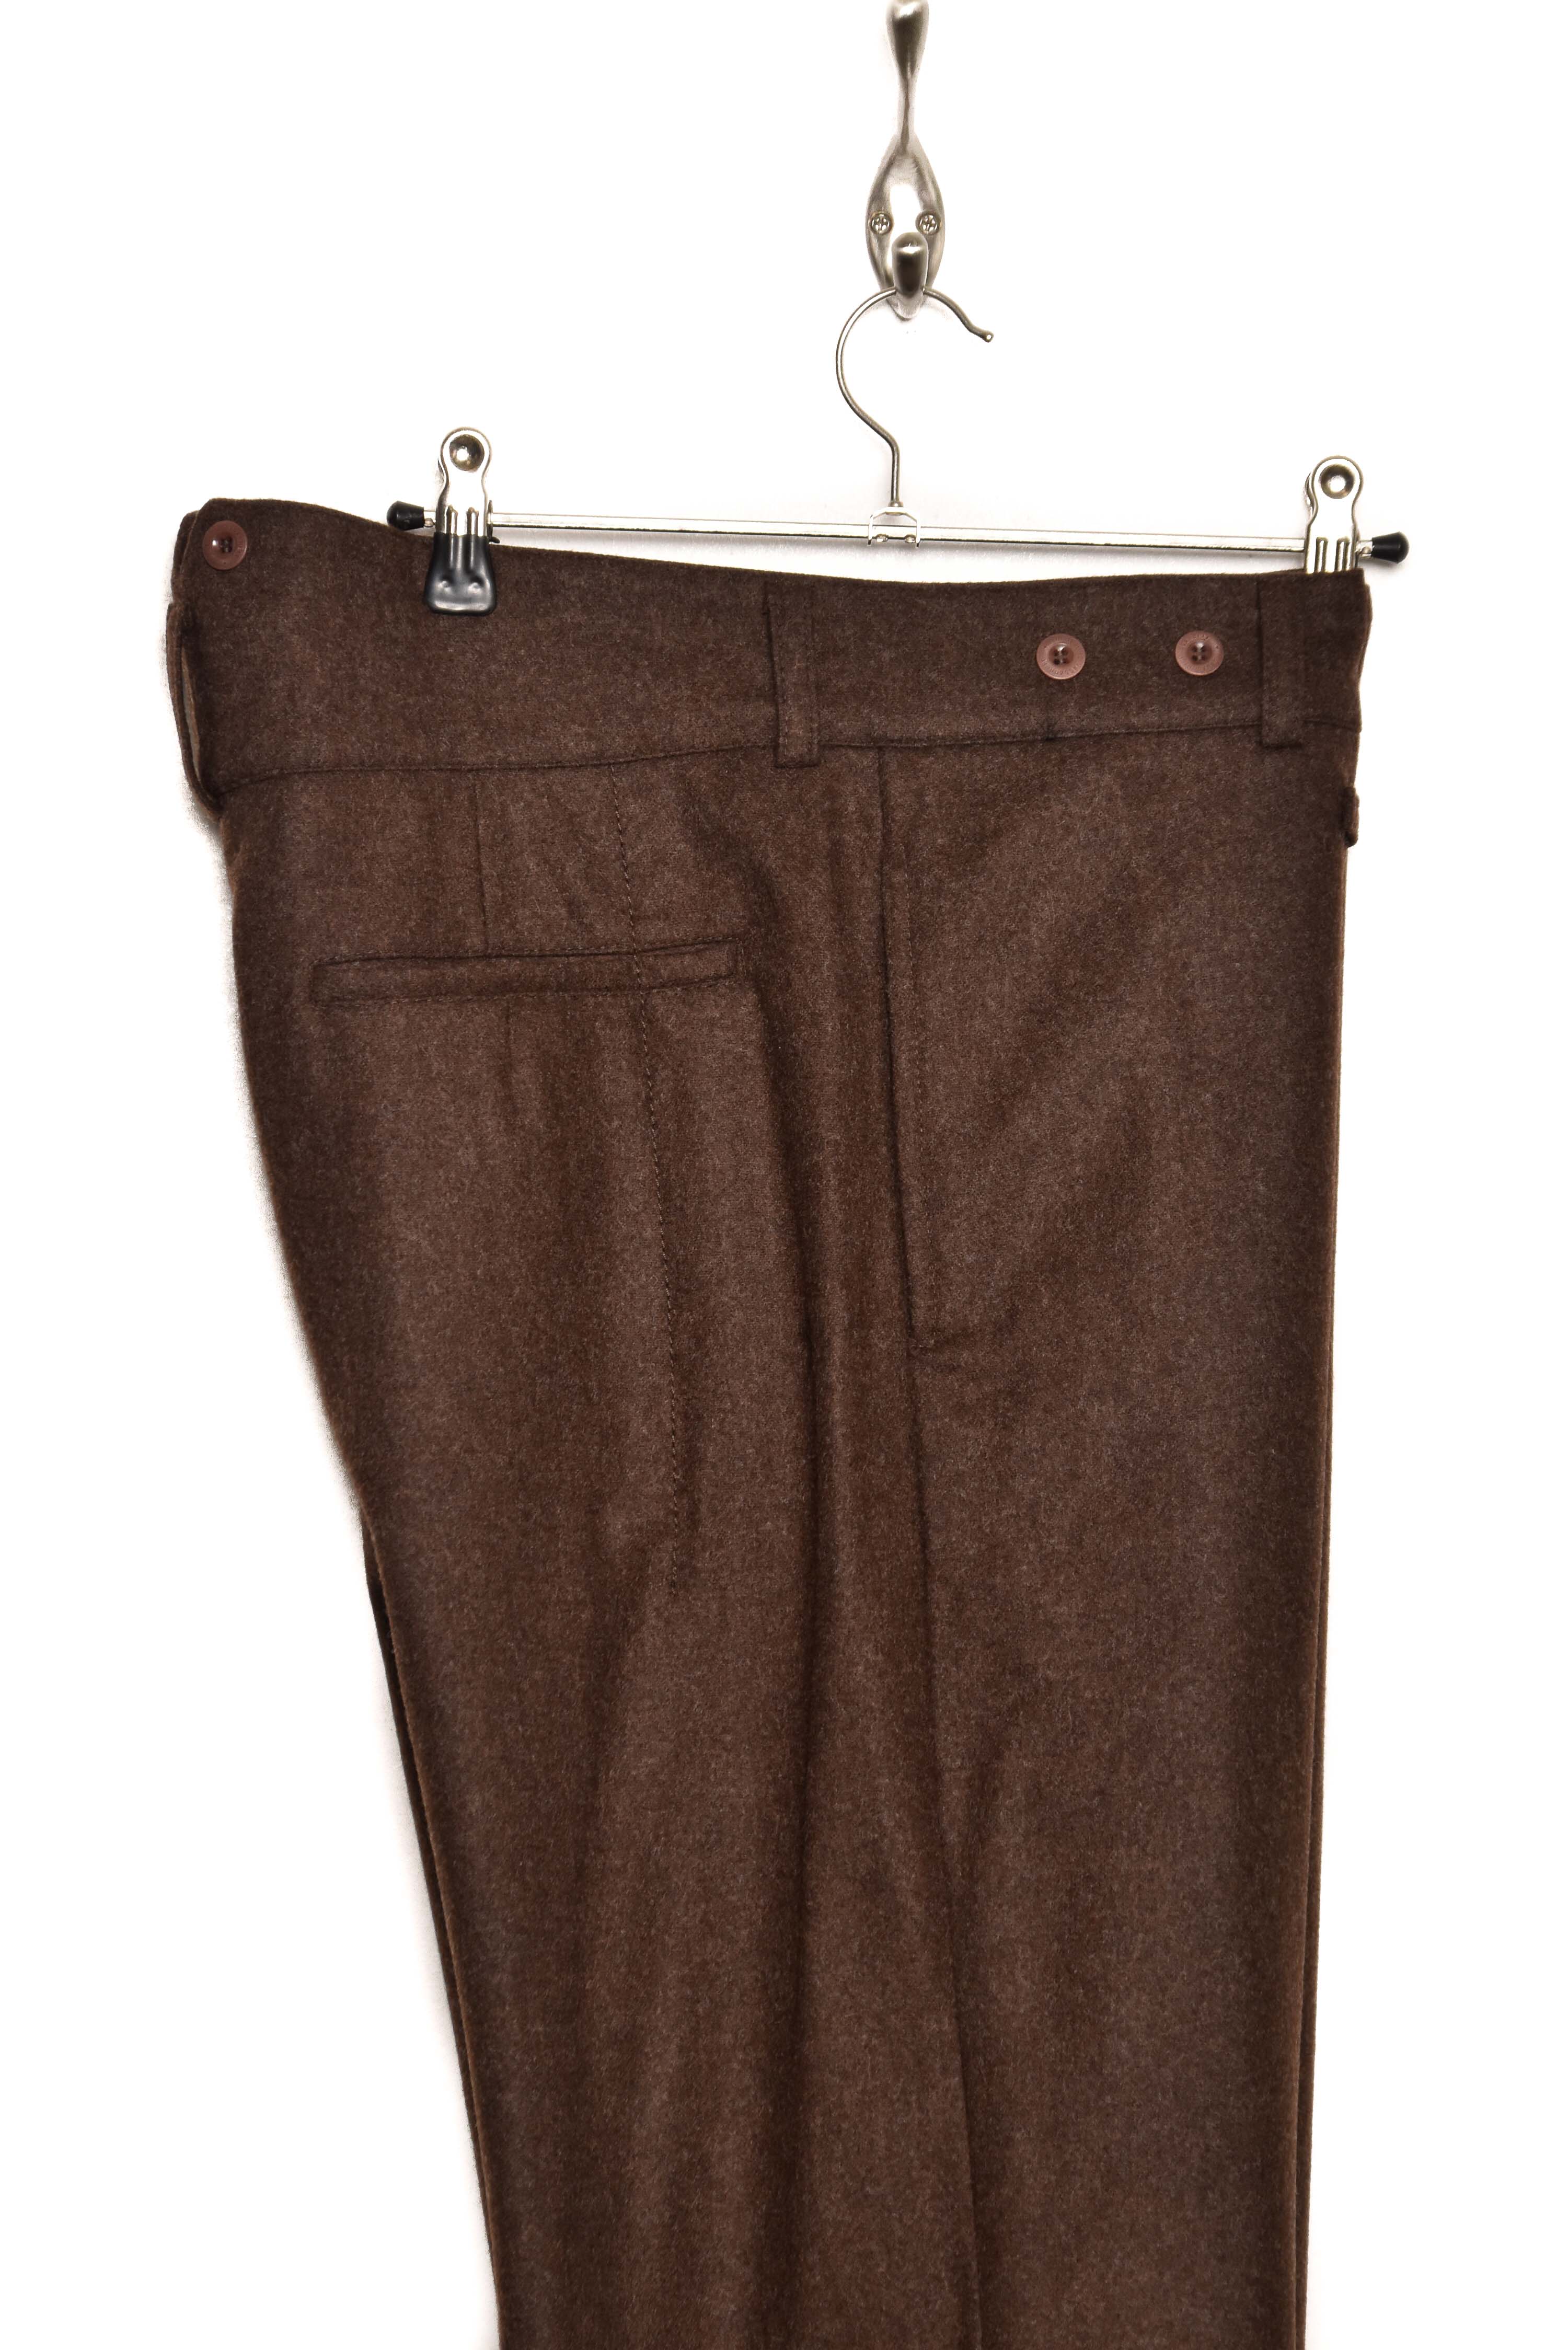 Frank Leder Wool Loden Trousers M007/03 chocolate 84